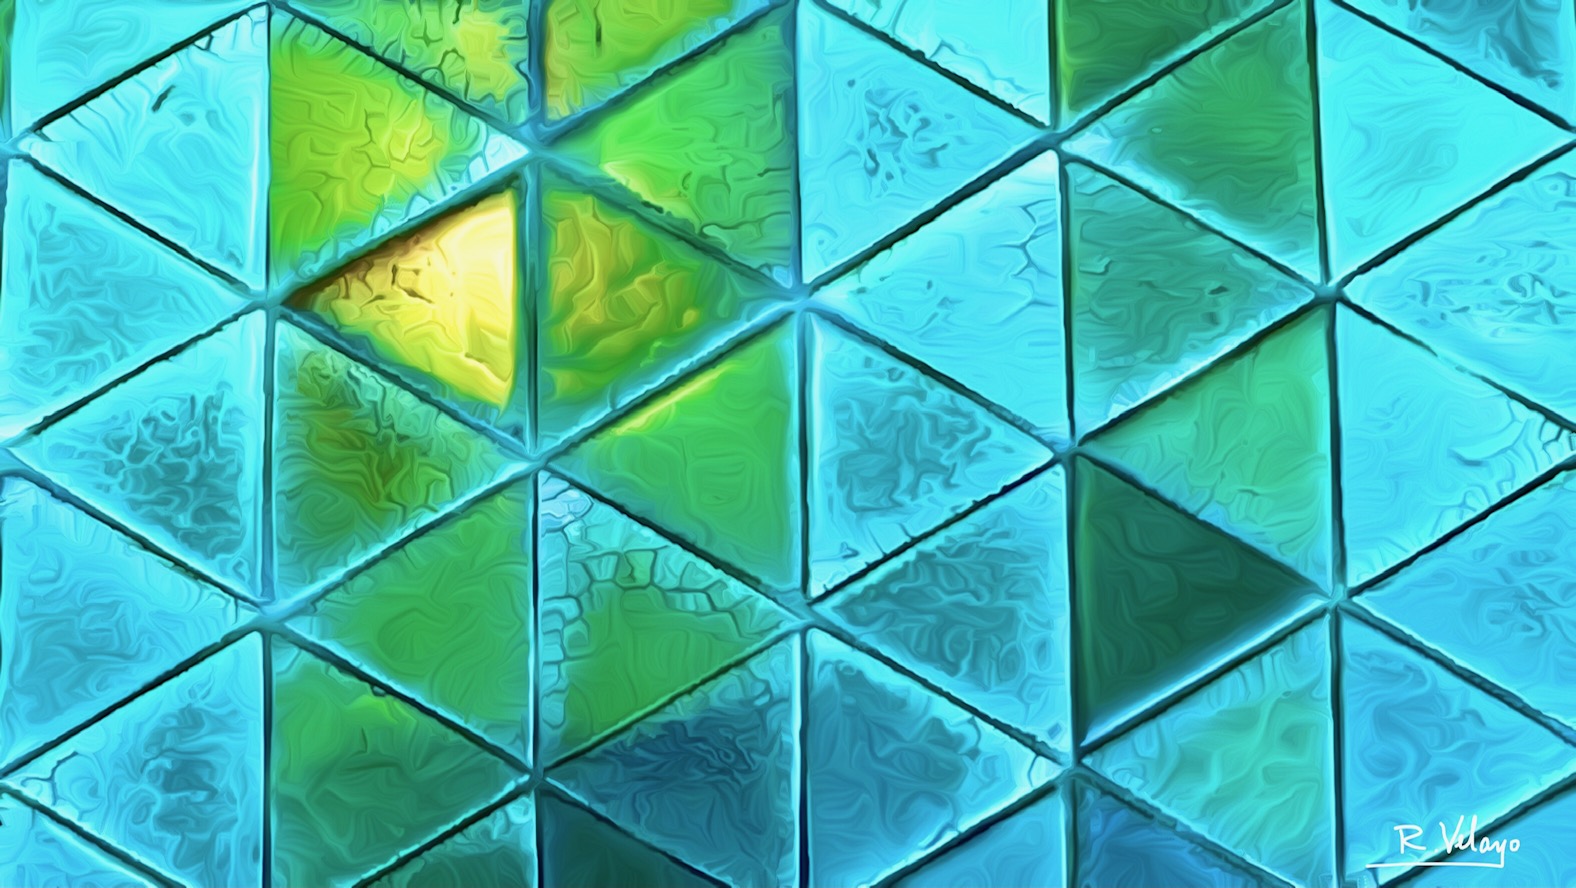 "TRIANGULAR TILES IN BLUES AND GREENS" [Created: 10/16/2022]